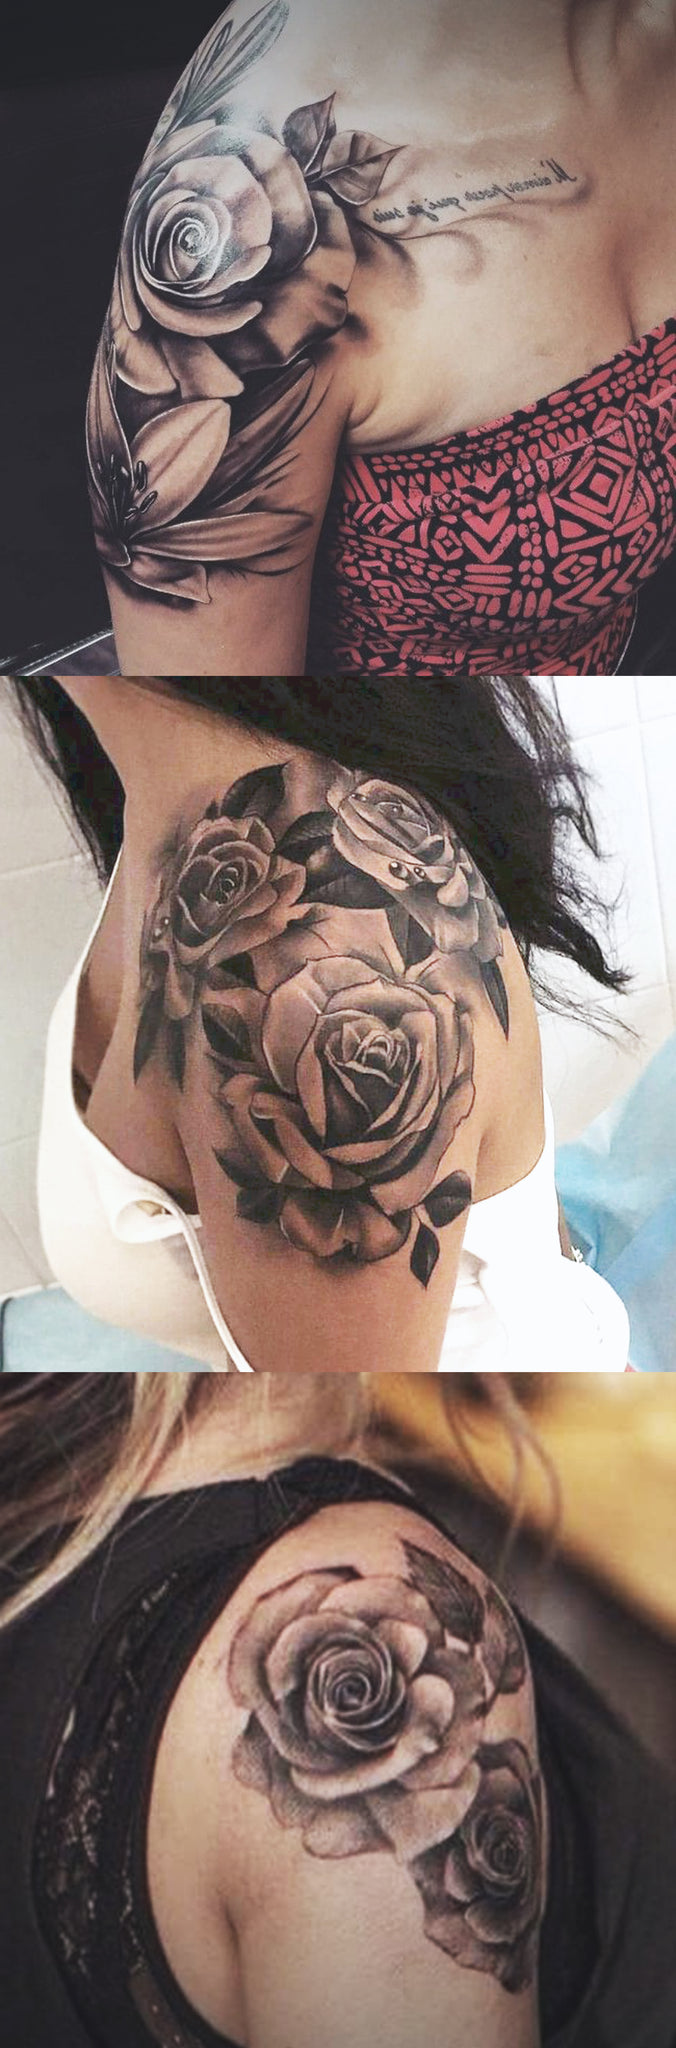 Realistic rose head tattoo on the shoulder